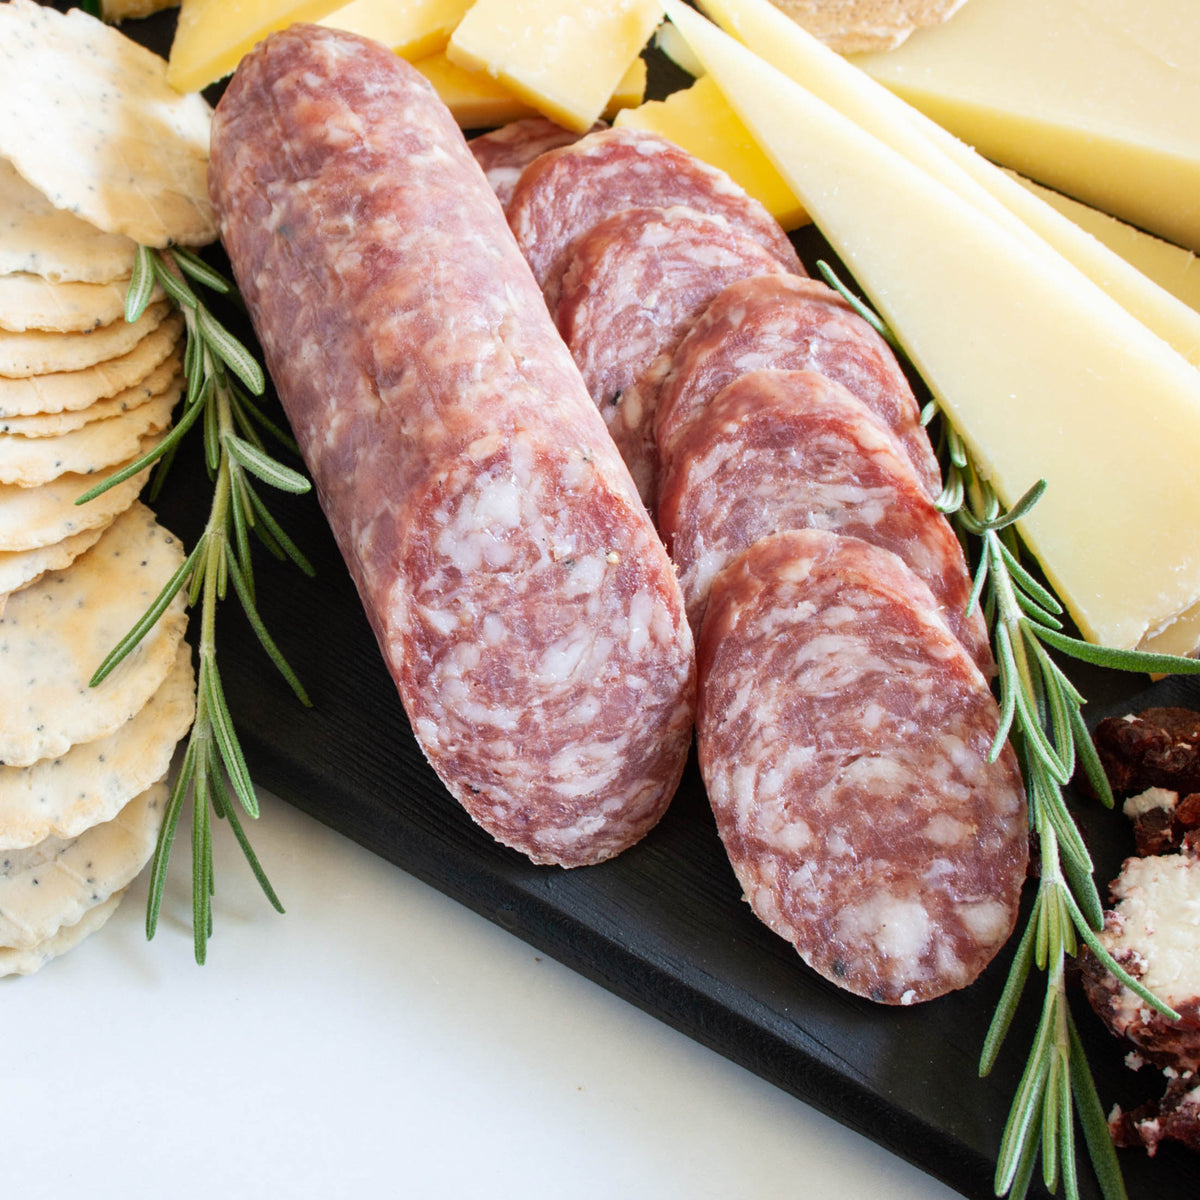 Our valued customers will receive a fair price and exceptional customer  service from Saucisson Sec - French Style Salami Les Trois Petits Cochons